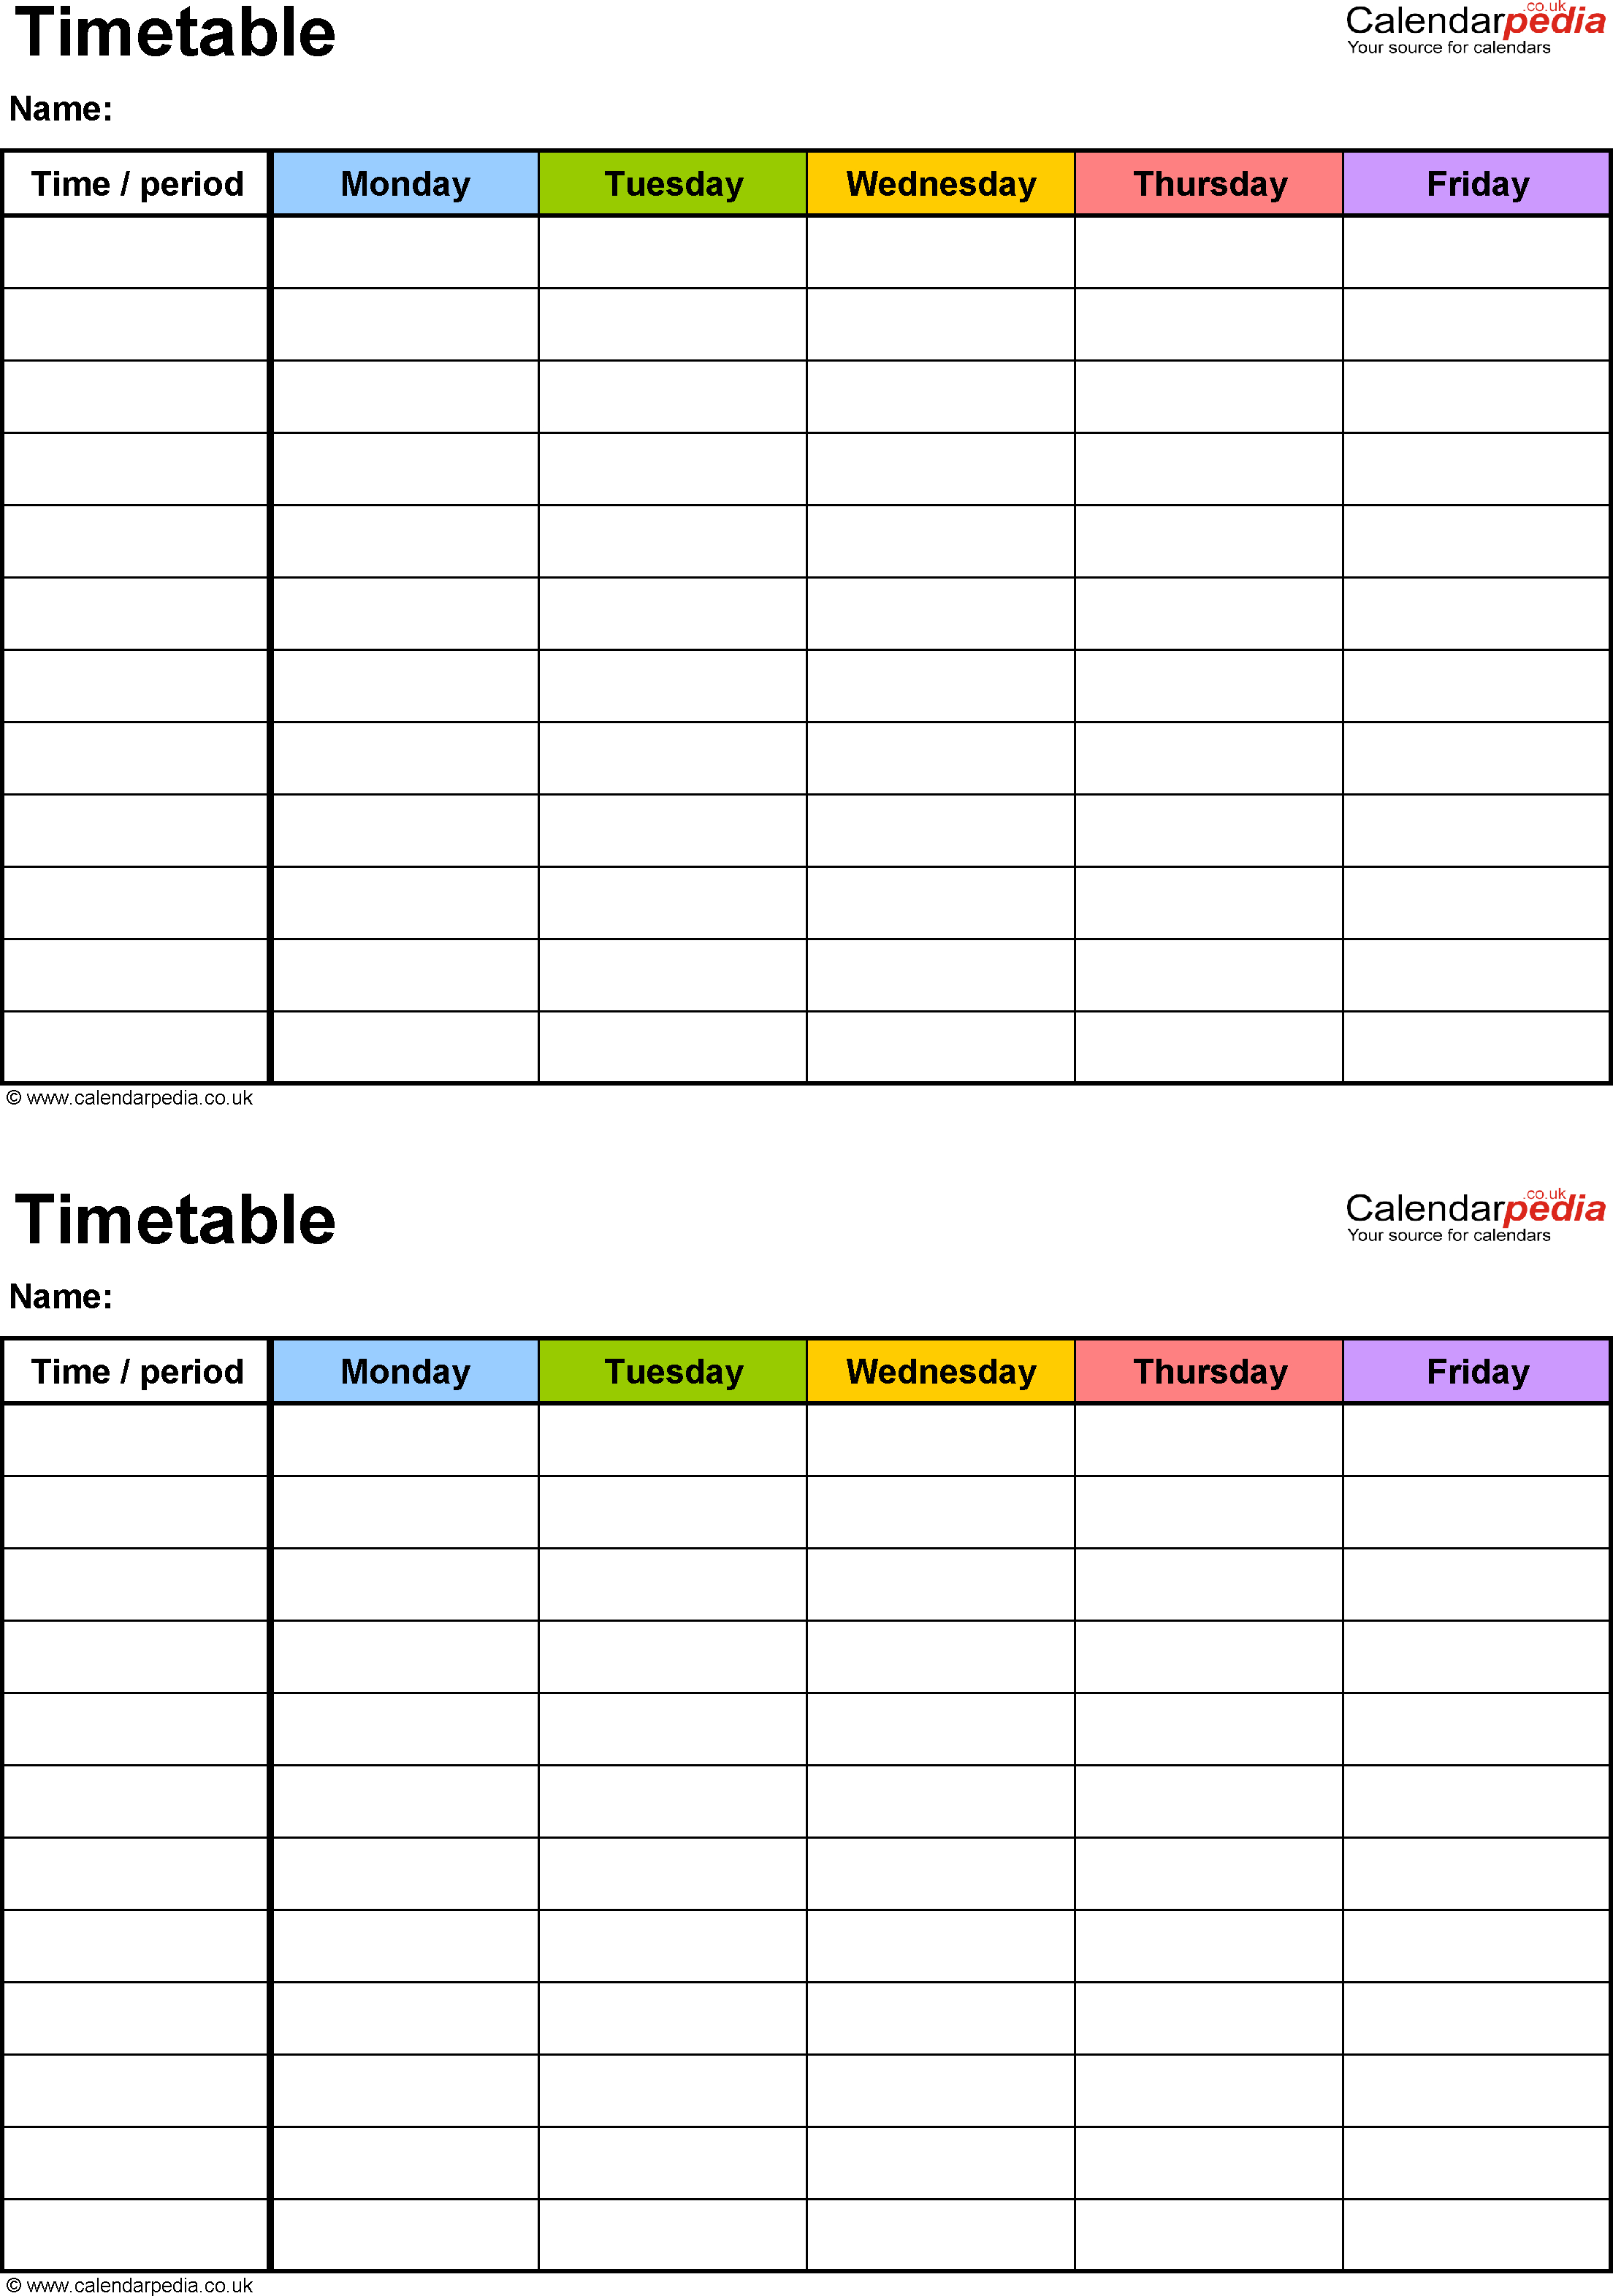 Excel Timetable Template 6: 2 A5 Timetables On One Page in Monday Through Friday Calendar Template Word